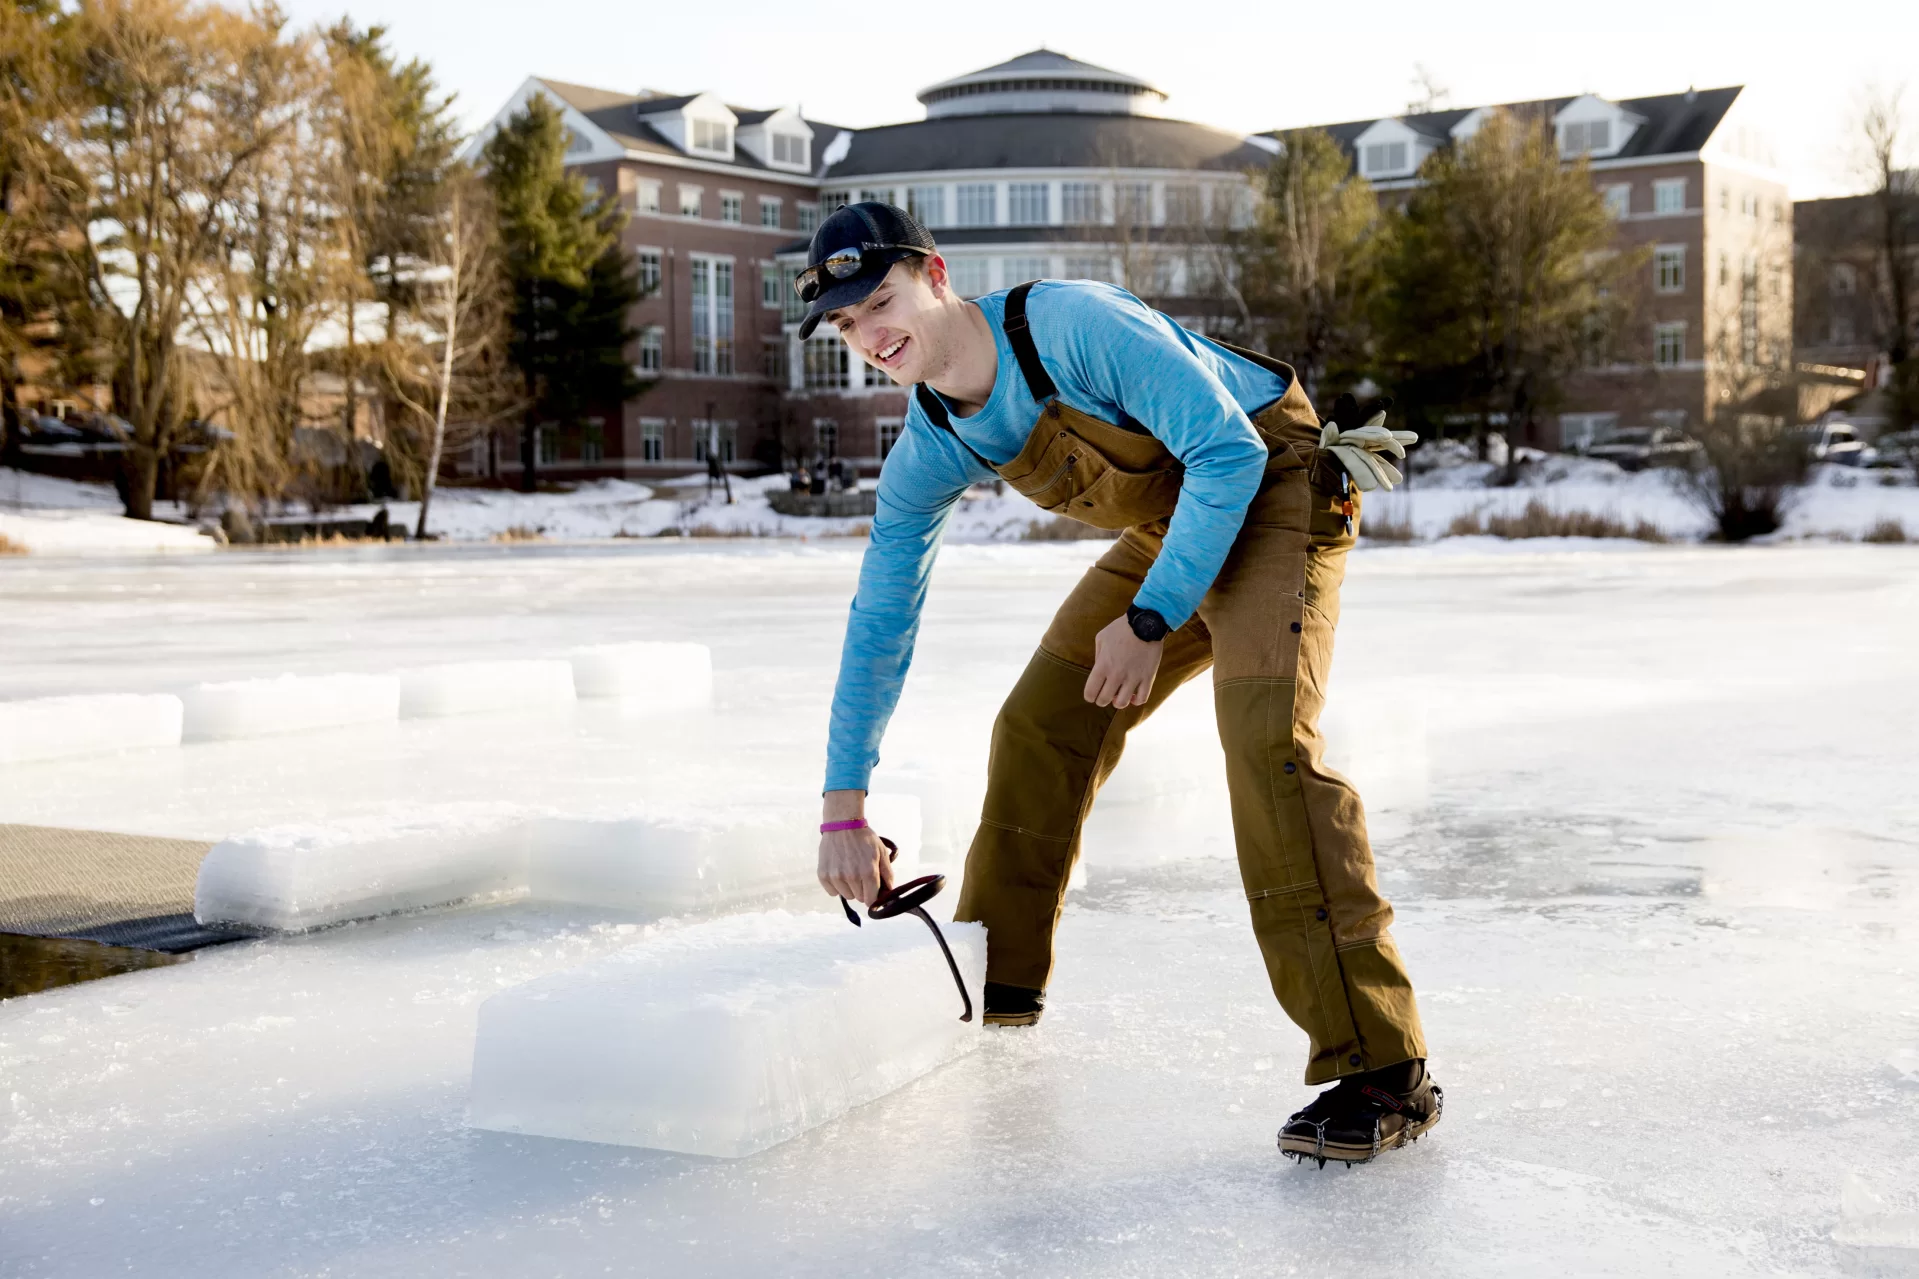 In this 2020 photograph,Jack Fruechte '22 of Minneapolis, Minn., grabs an ice block at Lake Andrews as he and others prepare the hole on Jan. 31 for that year's Puddle Jump. Fruechte cut this year's hole, as he did his first two years, a streak interrupted by the pandemic in 2021. (Phyllis Graber Jensen/Bates College)